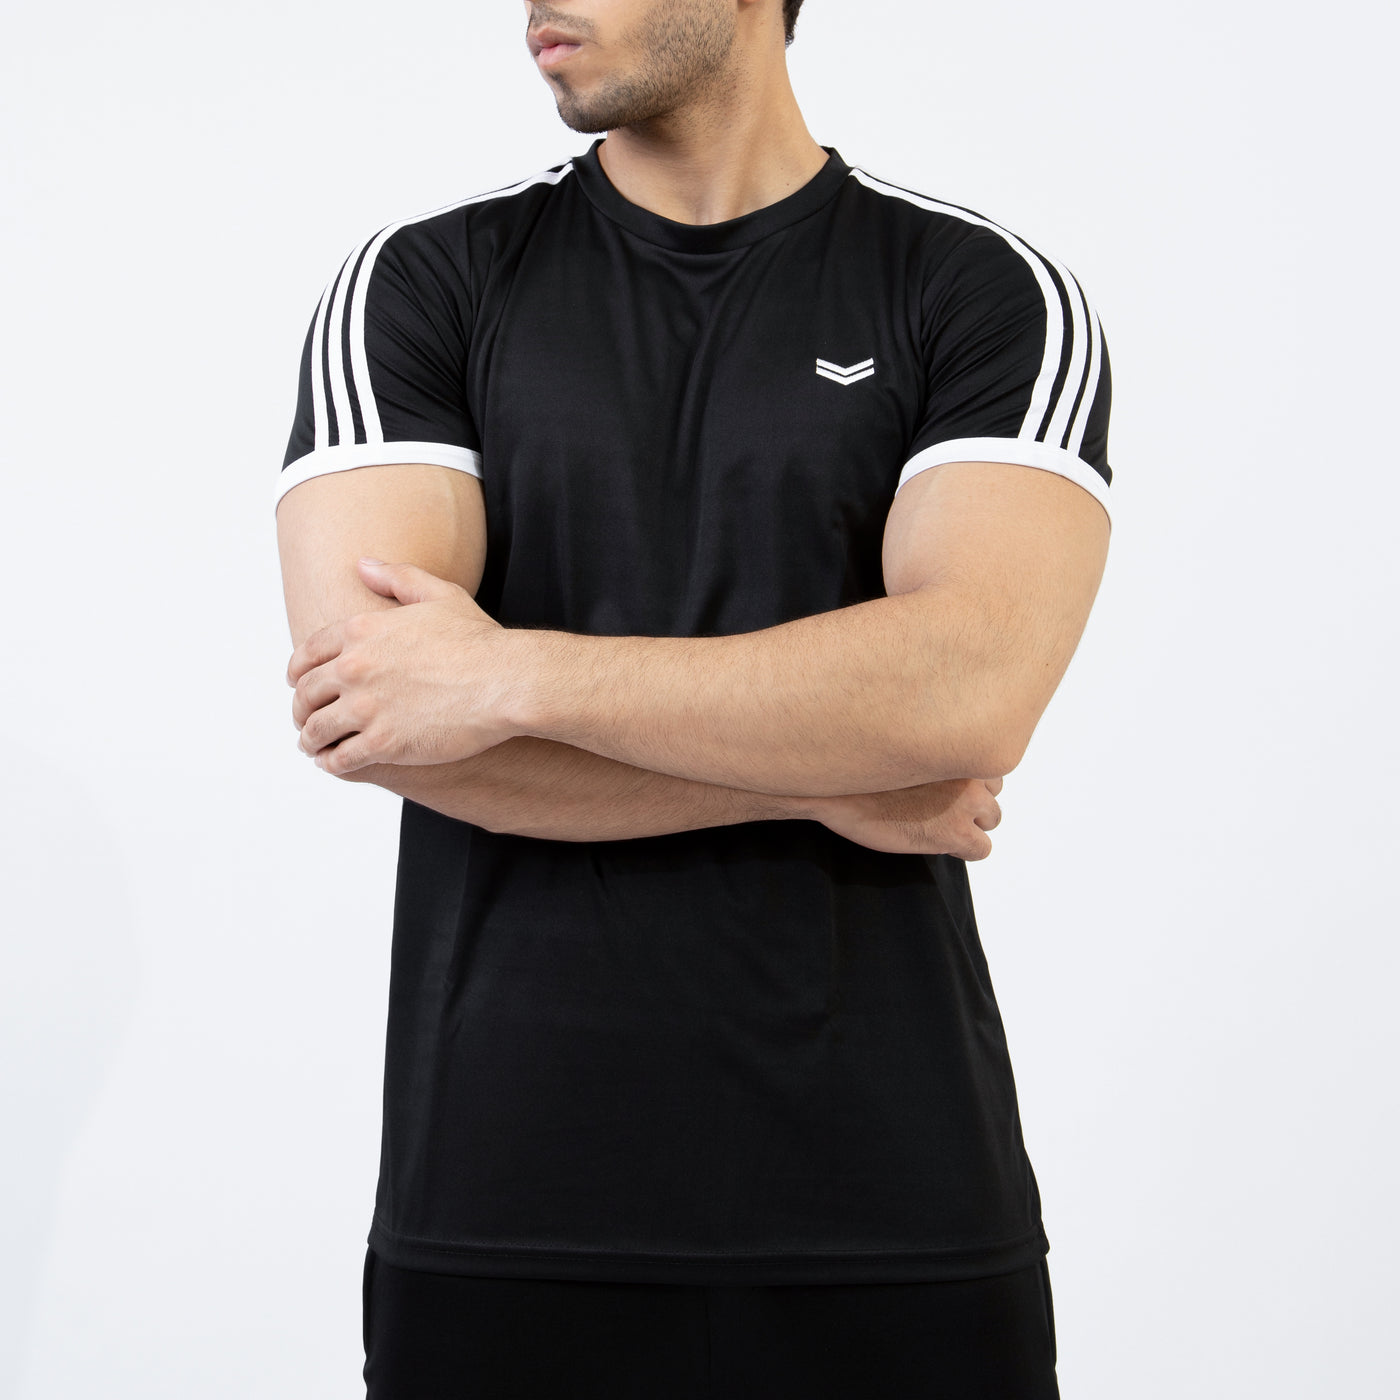 Black Quick Dry Ringer T-Shirt with Three Shoulder Stripes